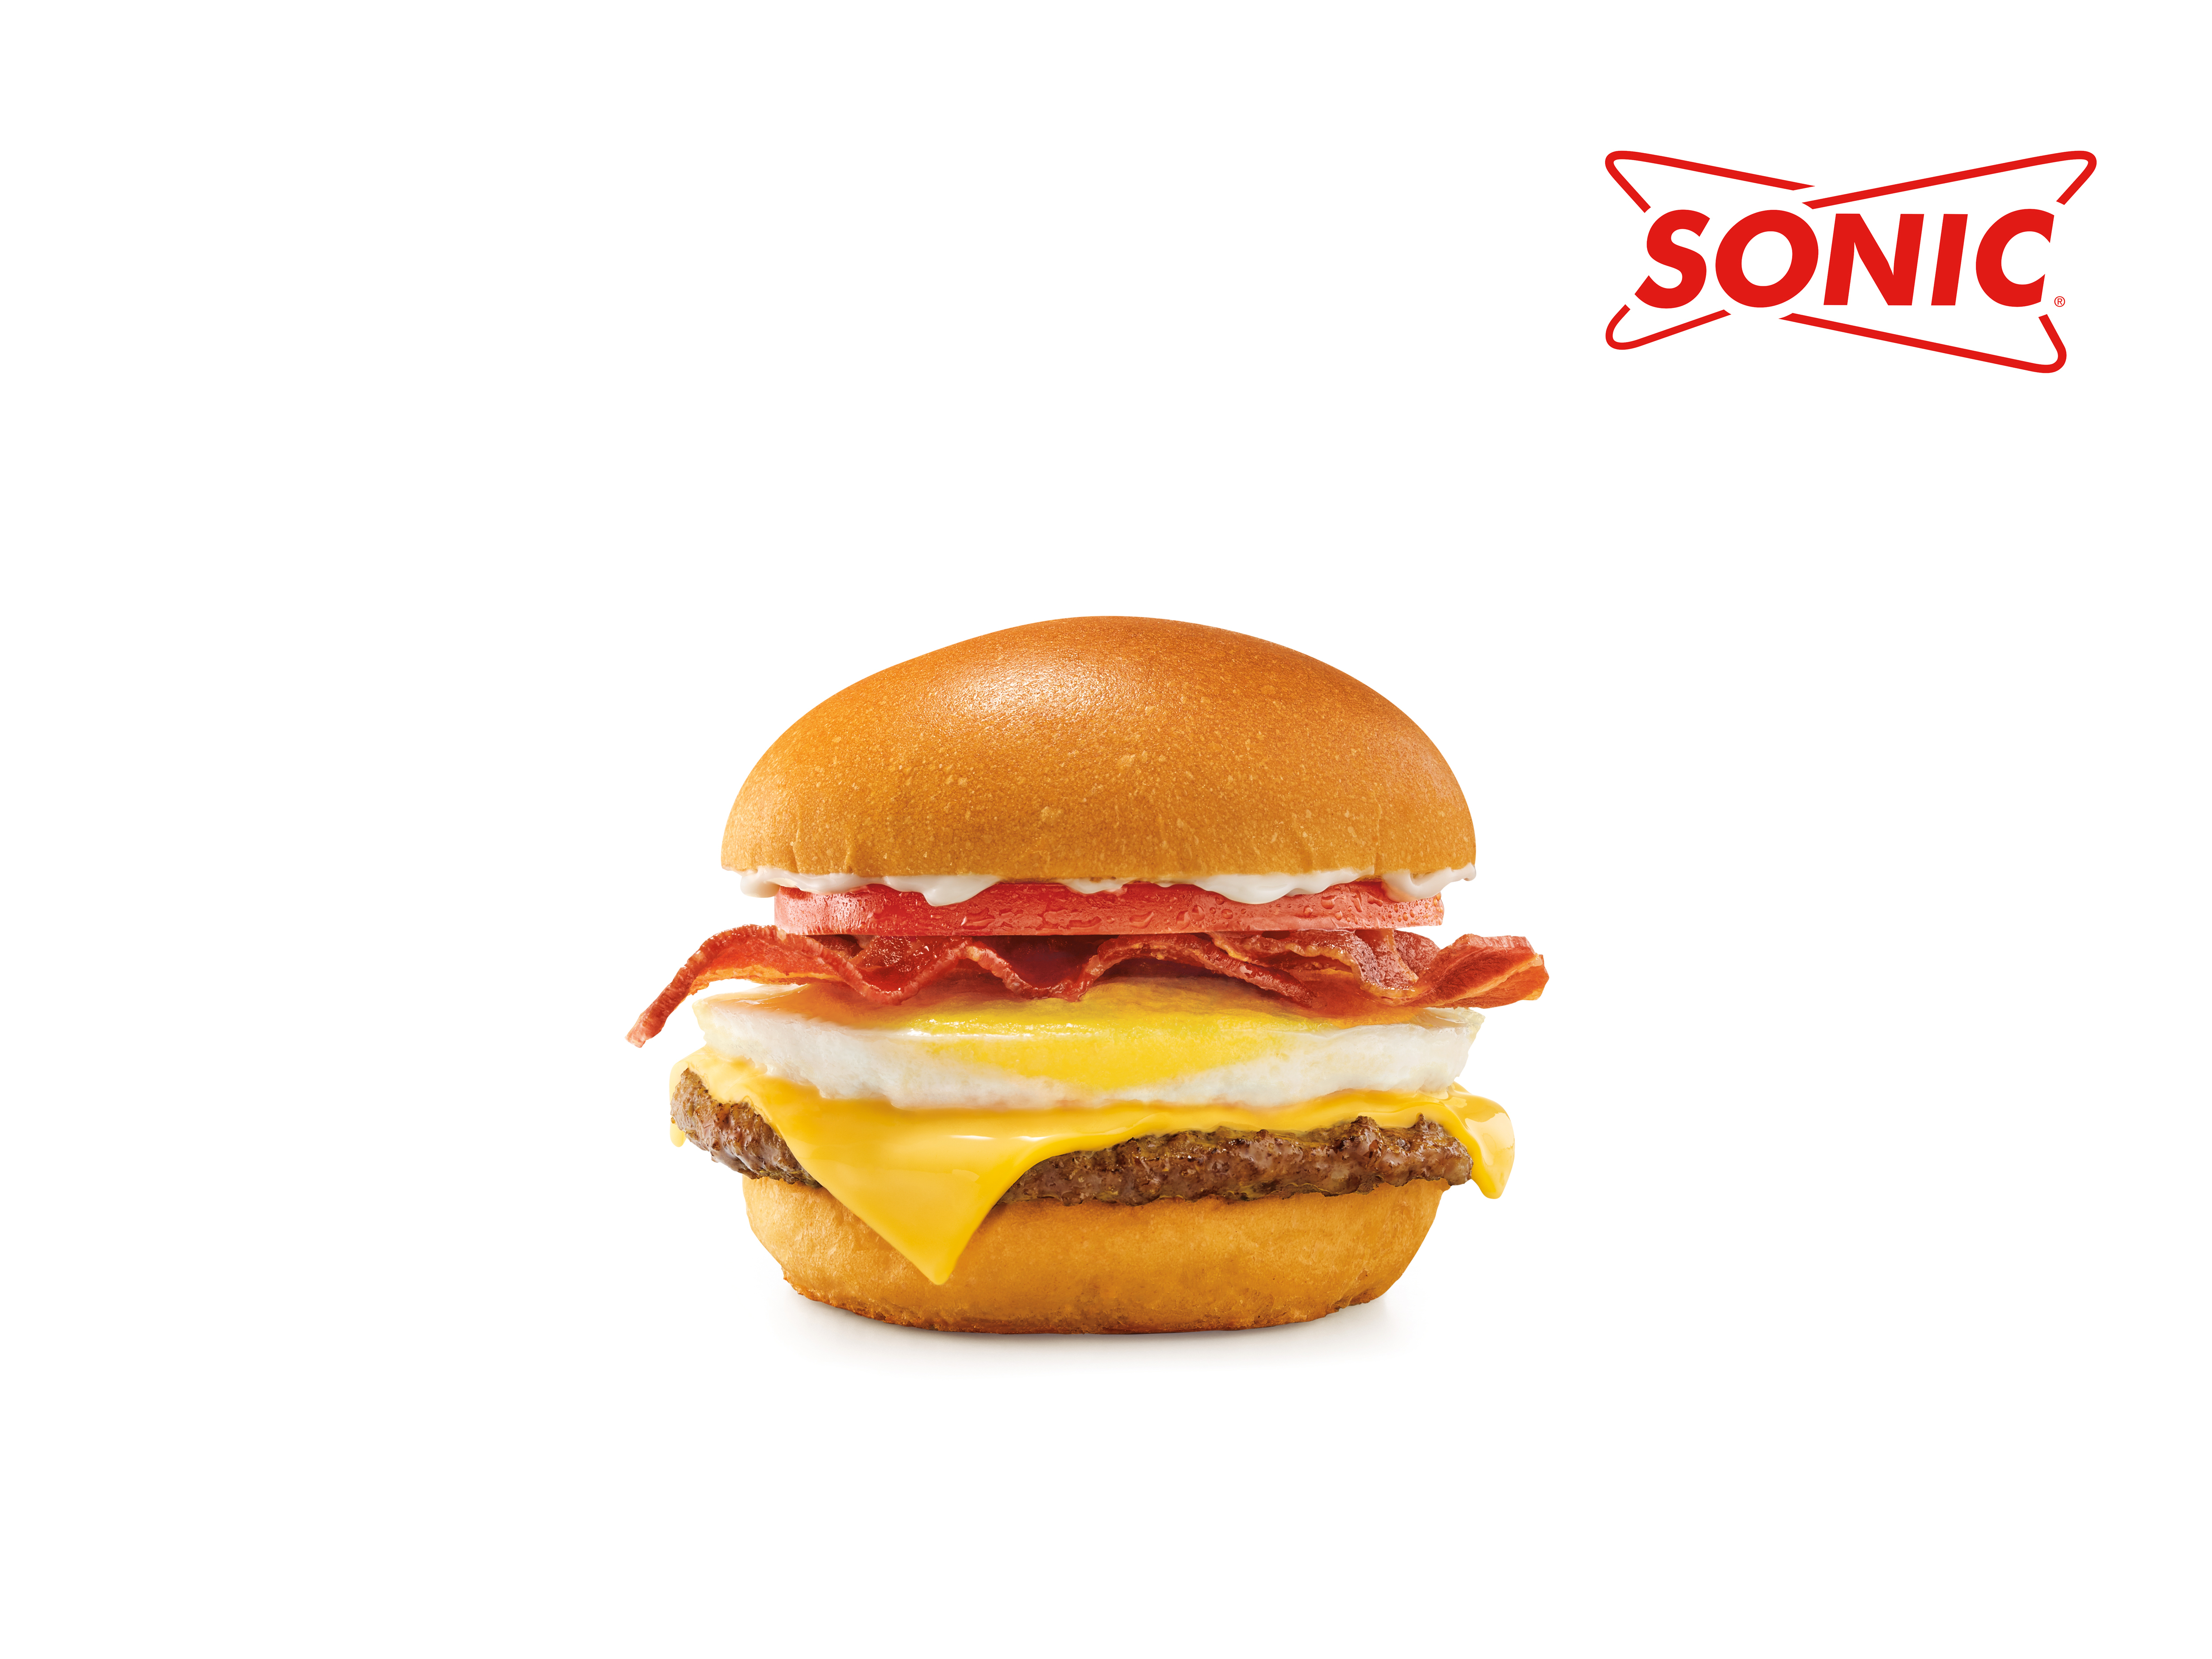 SONIC Puts an Egg on It with the All-New Brunch Burger | Business Wire